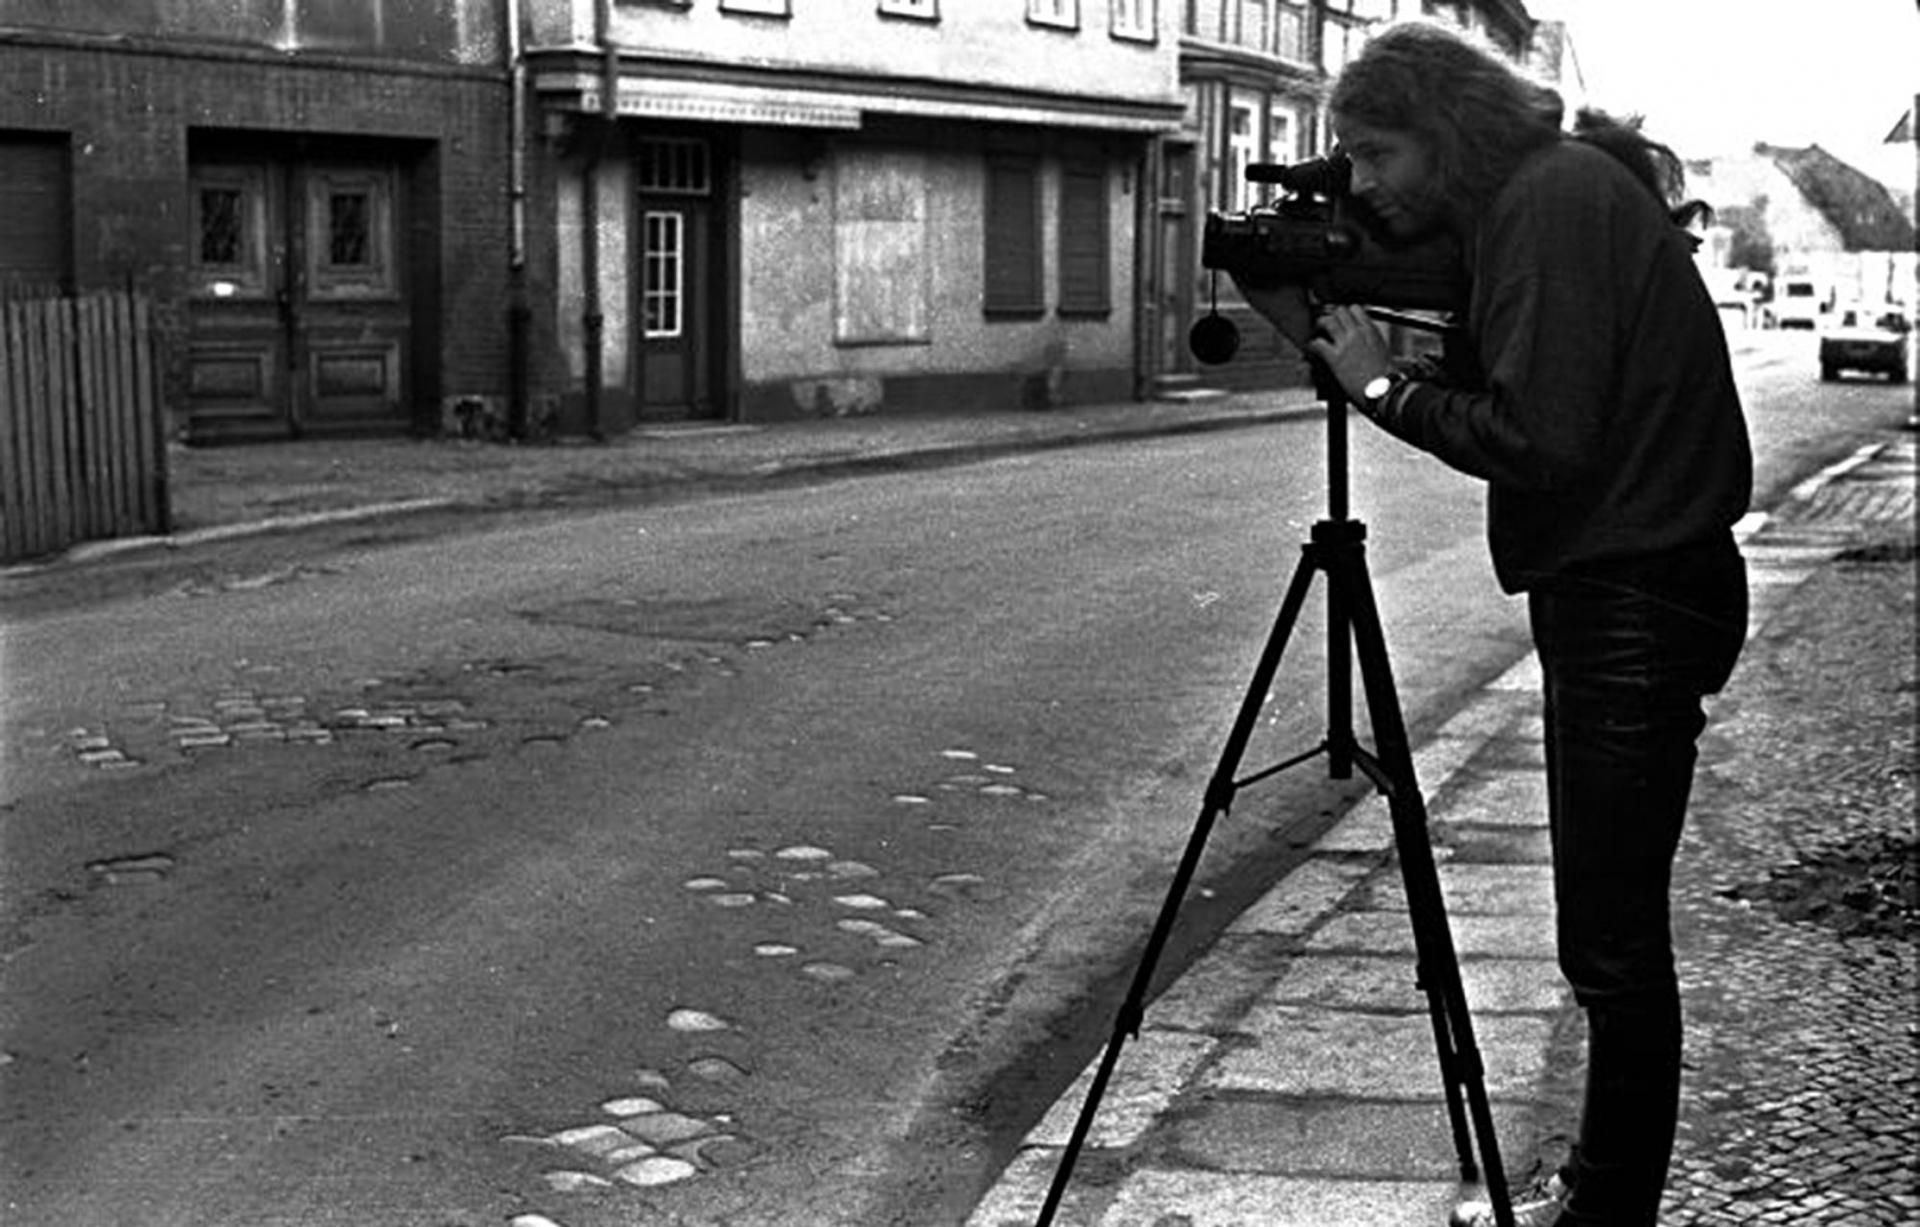 Siegbart Schefke is shown standing behind a camera on a tripod.